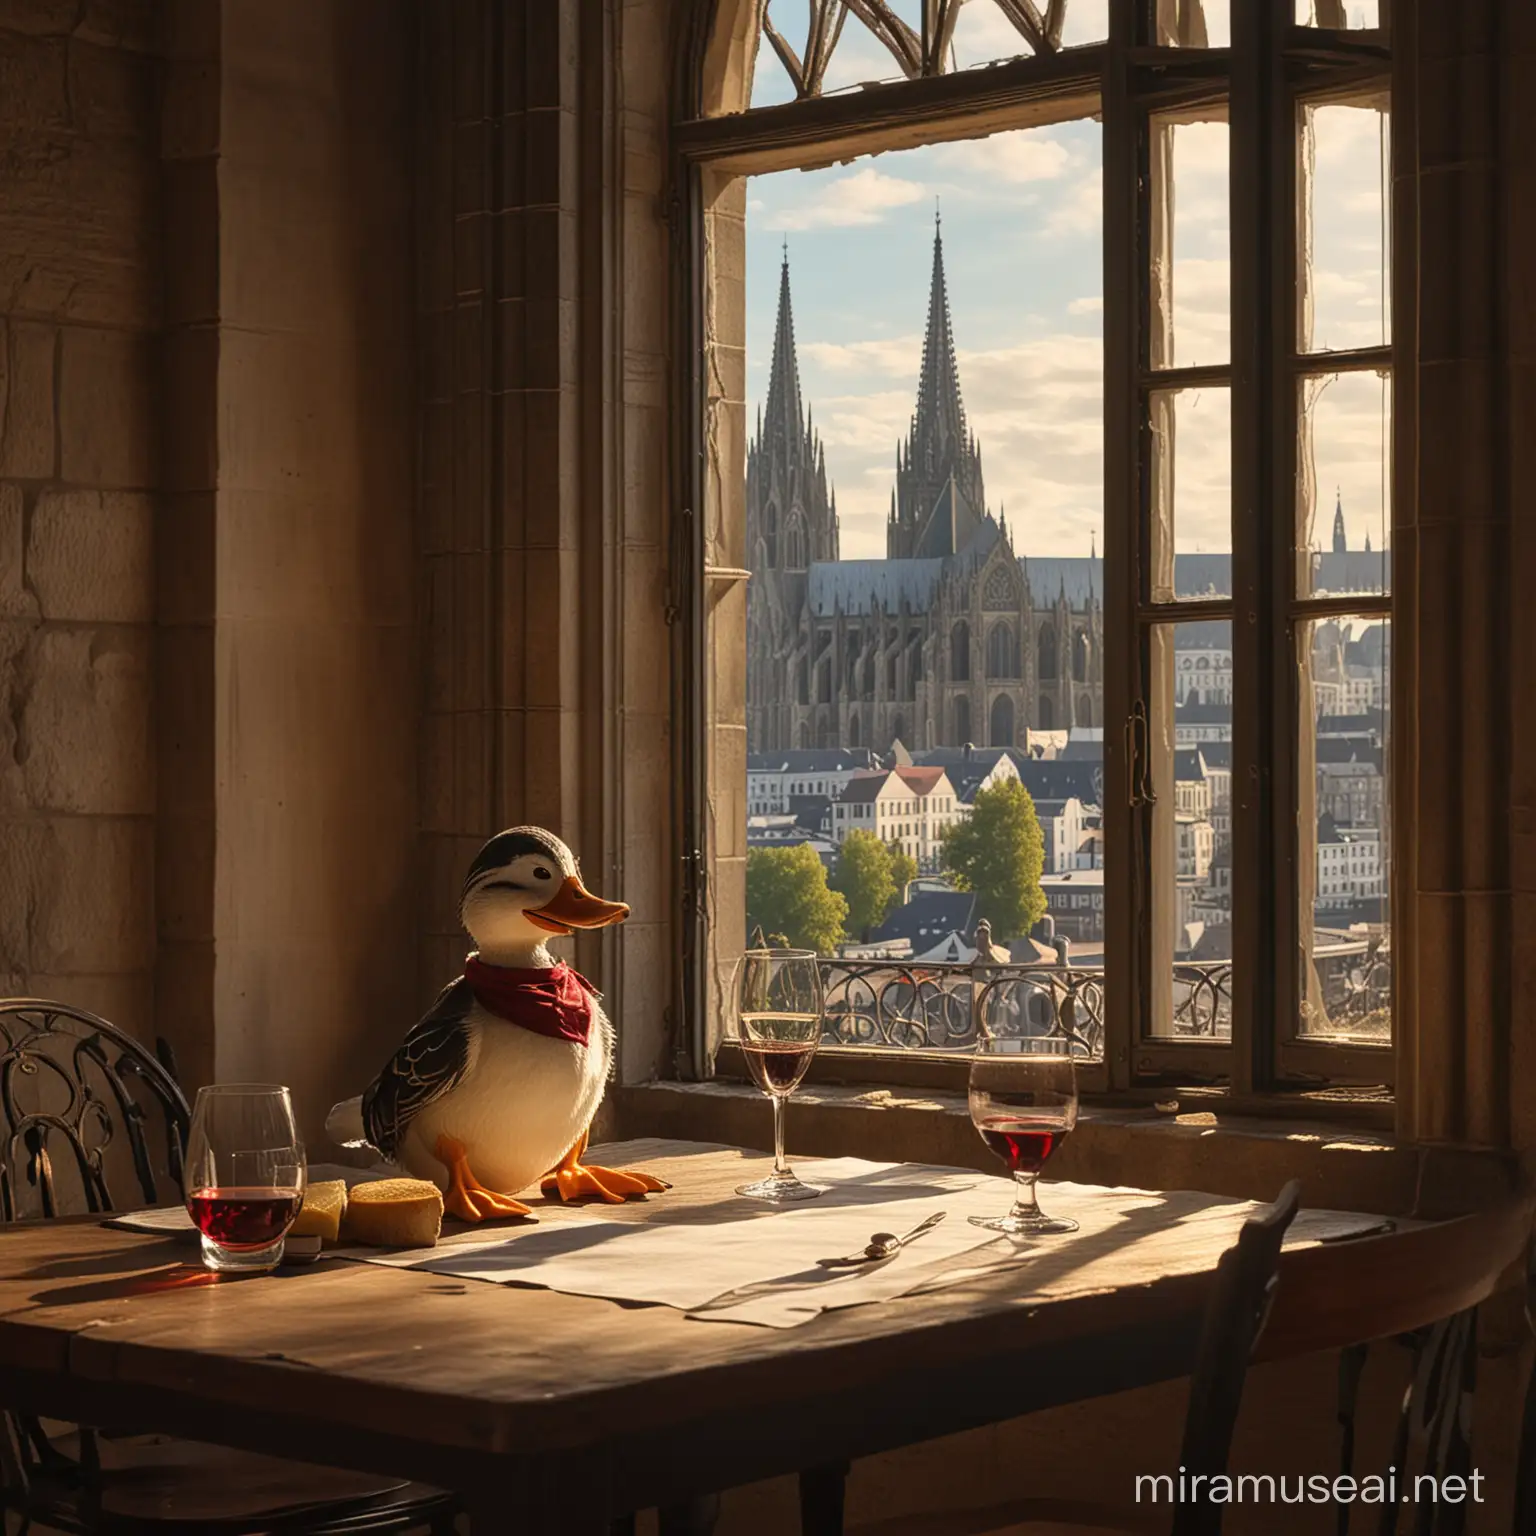 Dagobert Duck Enjoys Wine with a View of Cologne Cathedral